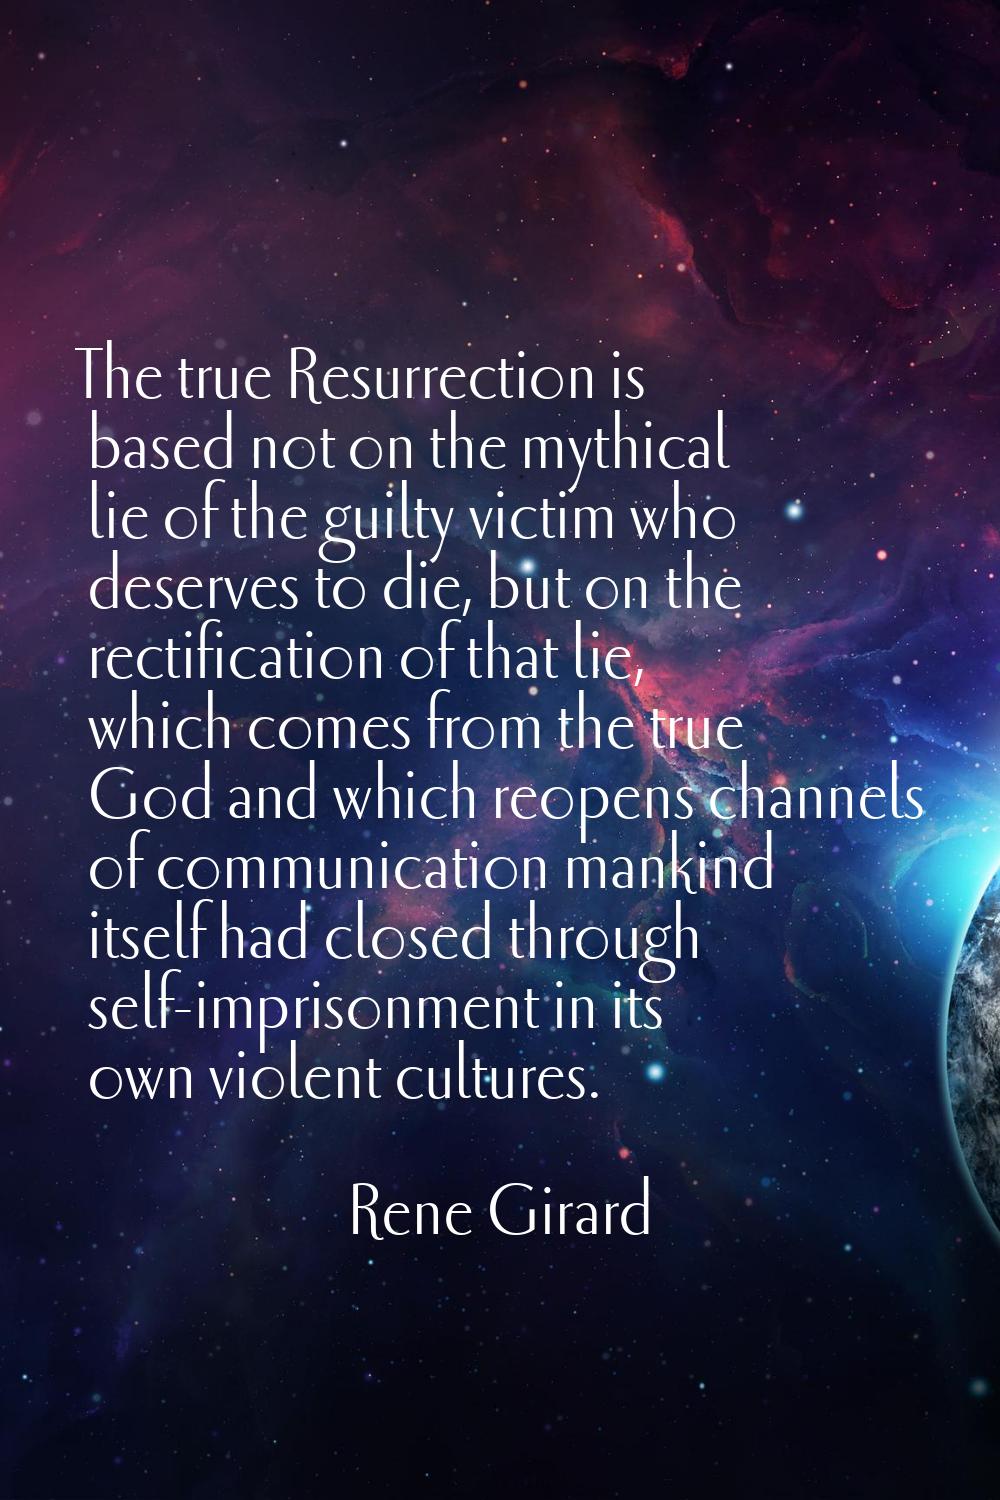 The true Resurrection is based not on the mythical lie of the guilty victim who deserves to die, bu